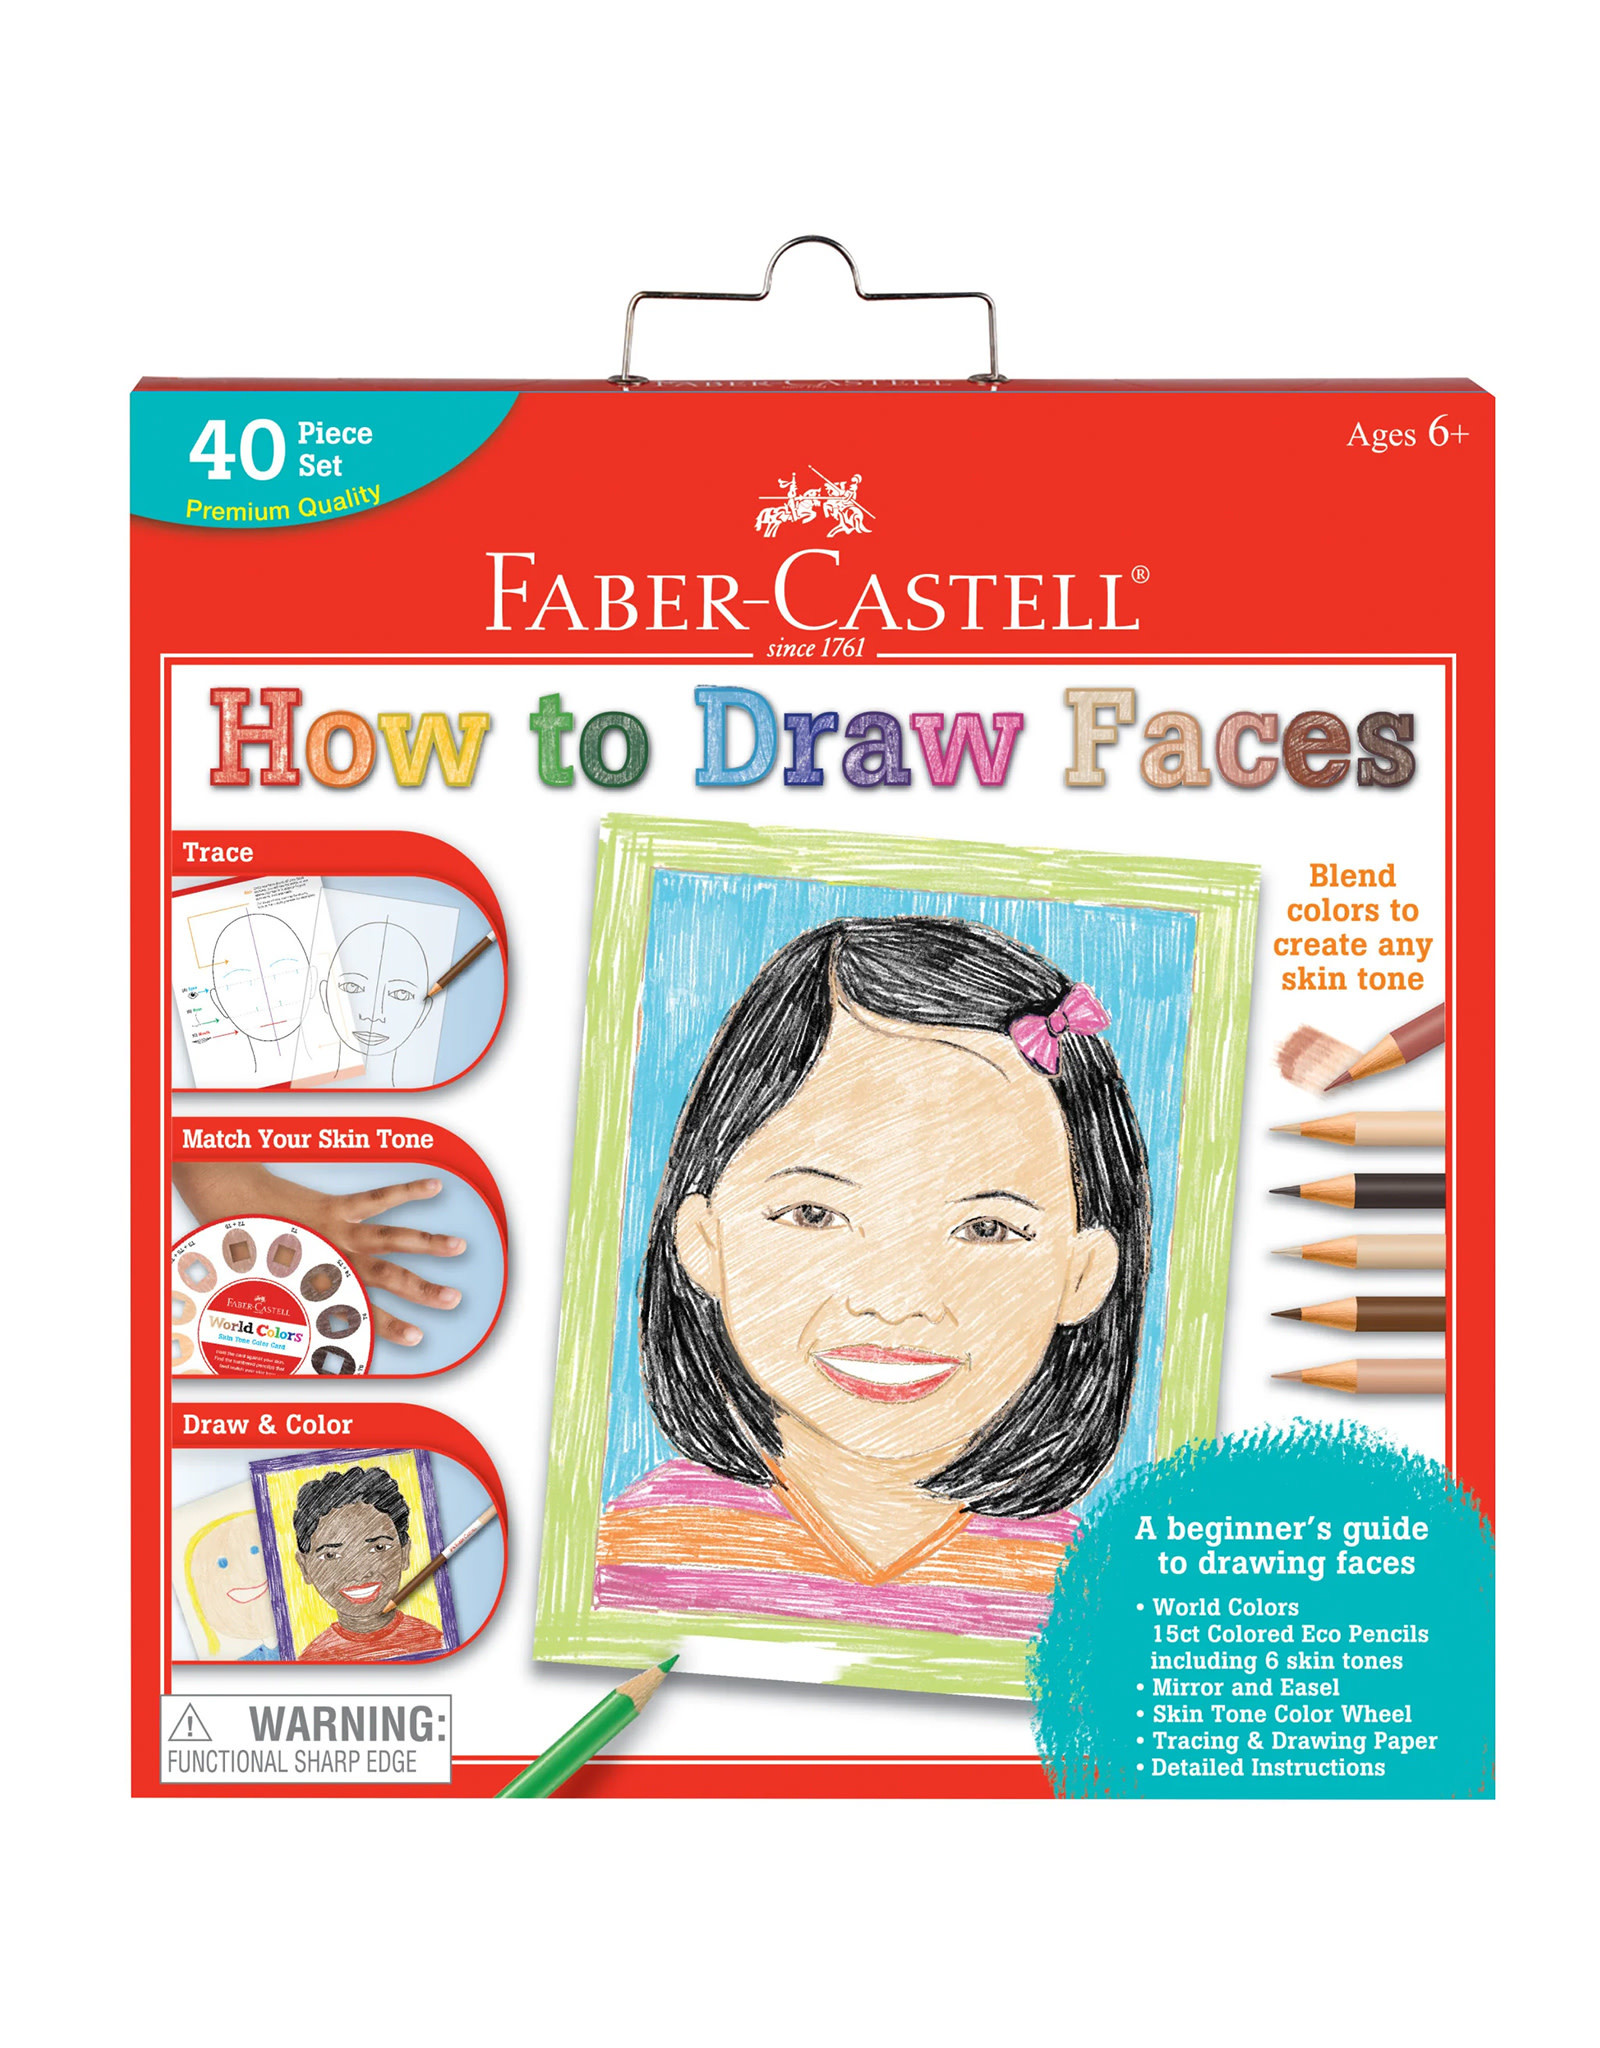 FABER-CASTELL Faber-Castell How to Draw Faces